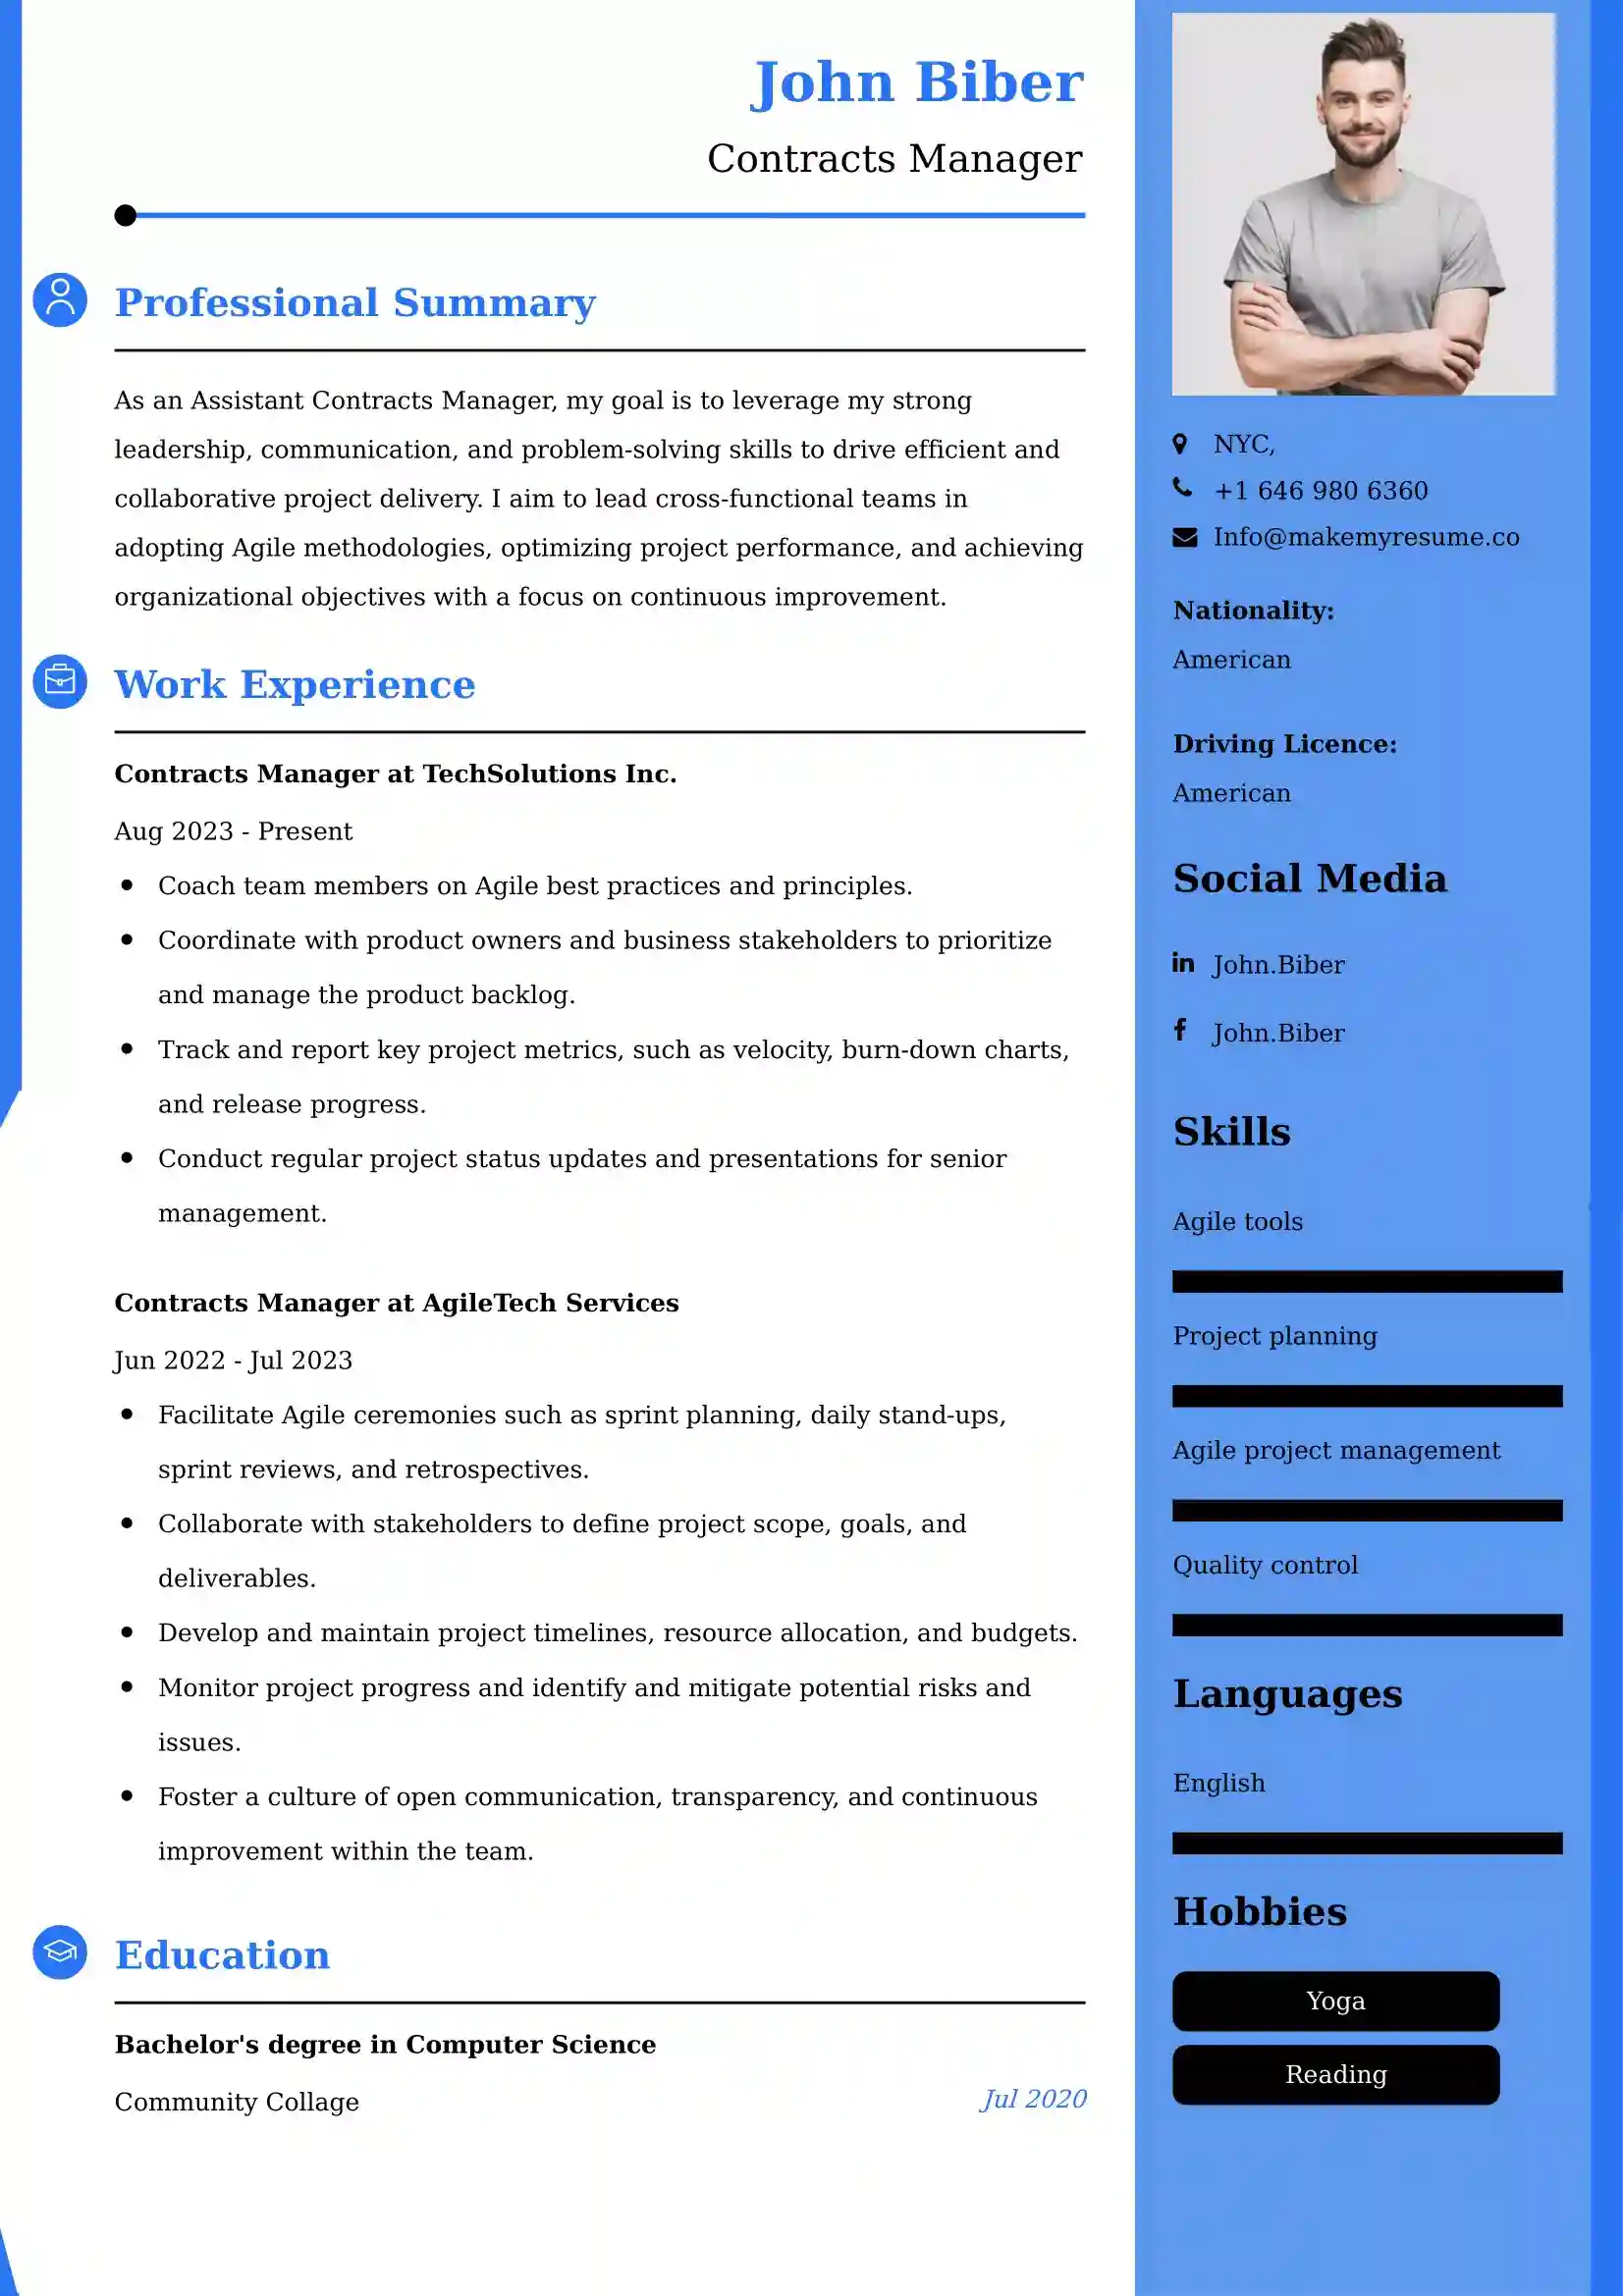 Contracts Manager Resume Examples for UK Jobs - Tips and Guide